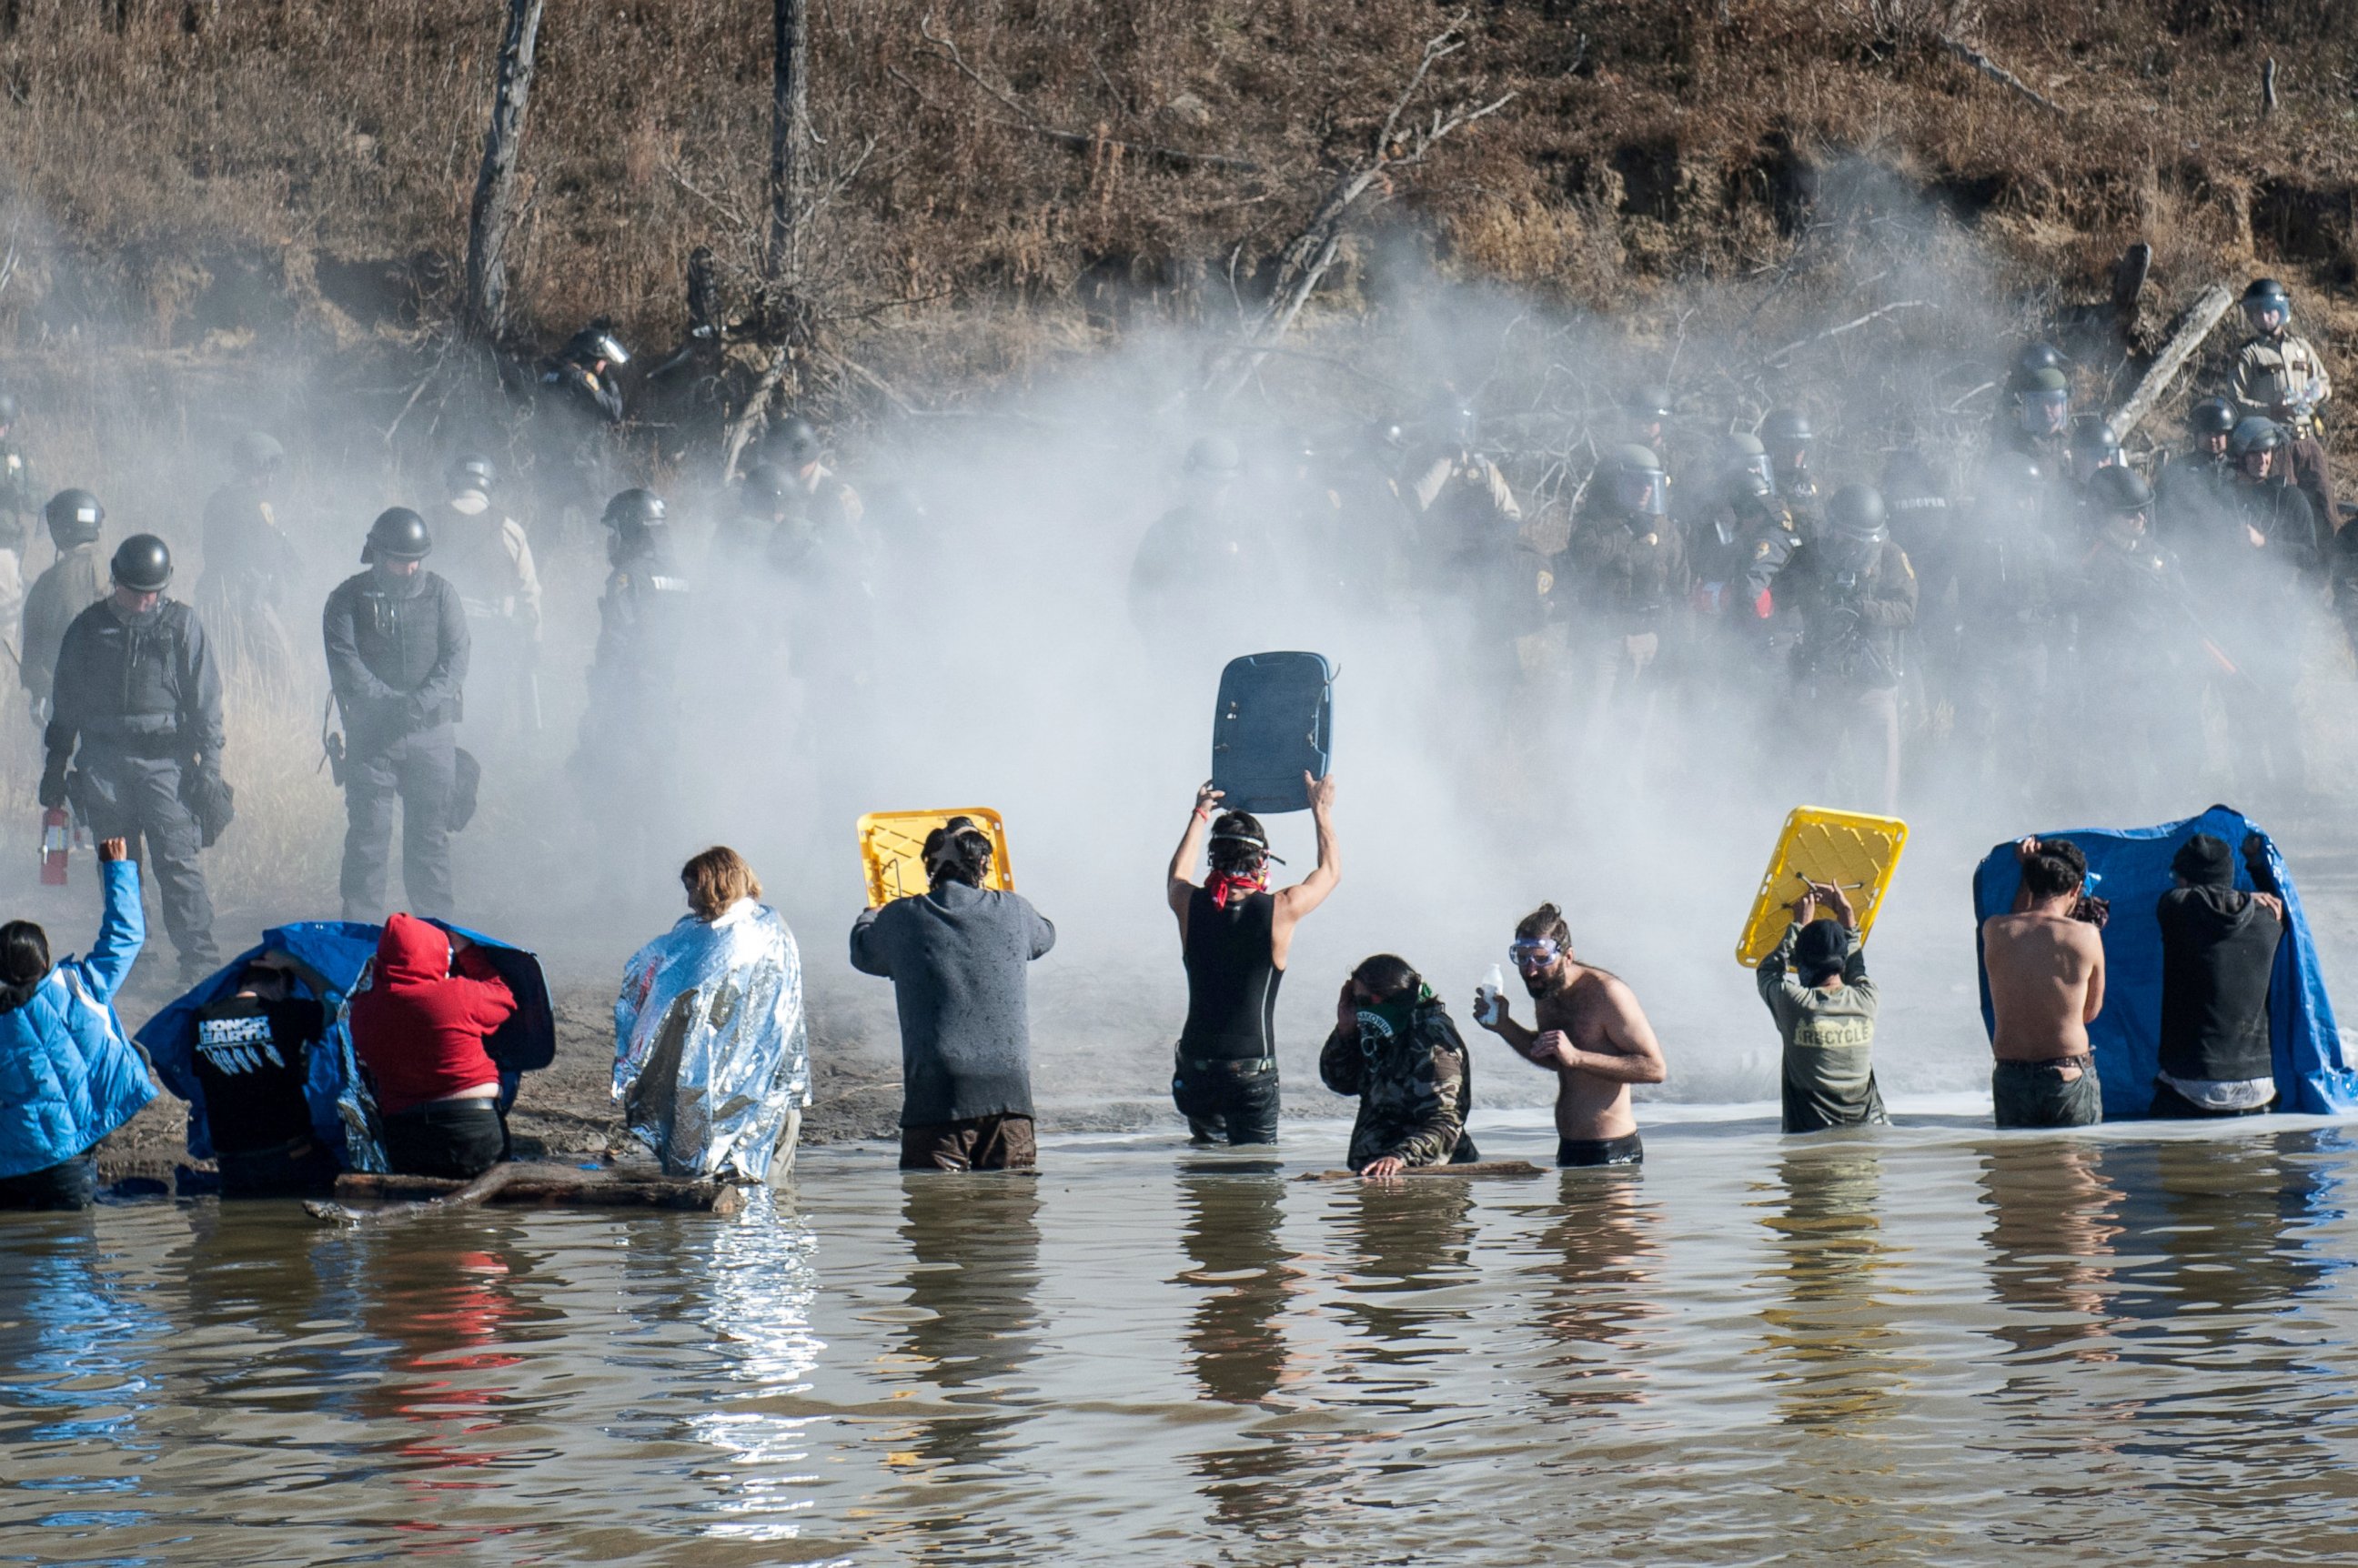 PHOTO: Police use pepper spray against protestors standing in the water of a river during a protest against the building of a pipeline near the Standing Rock Indian Reservation near Cannonball, North Dakota, Nov. 2, 2016.